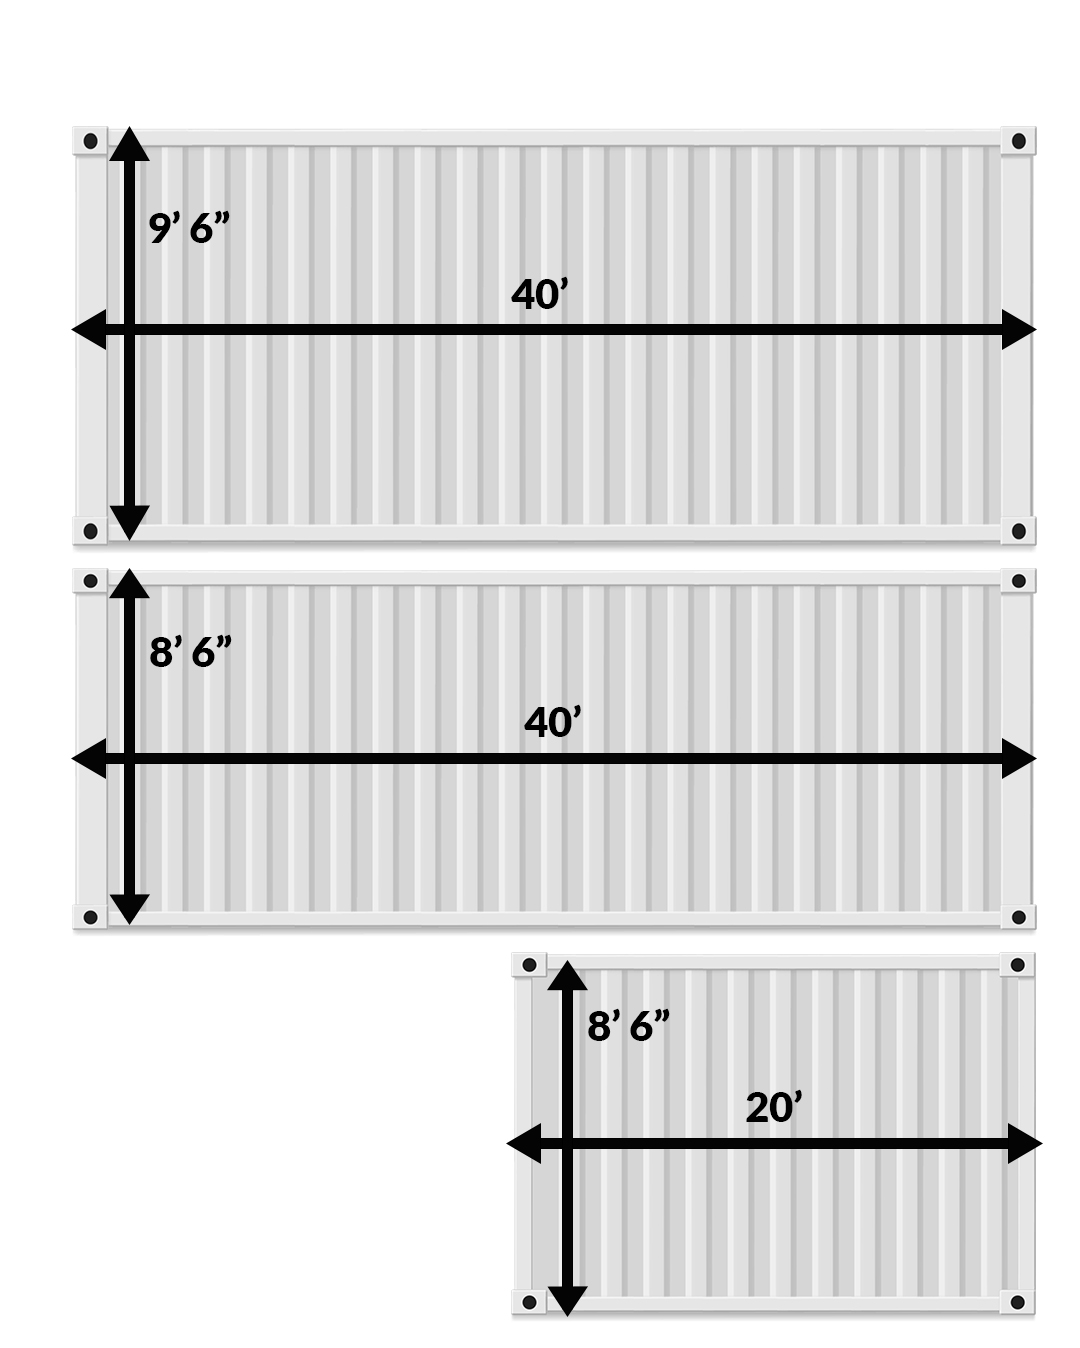 Diagram of the 3 sizes of containers for FCL & LCL Ocean Freight